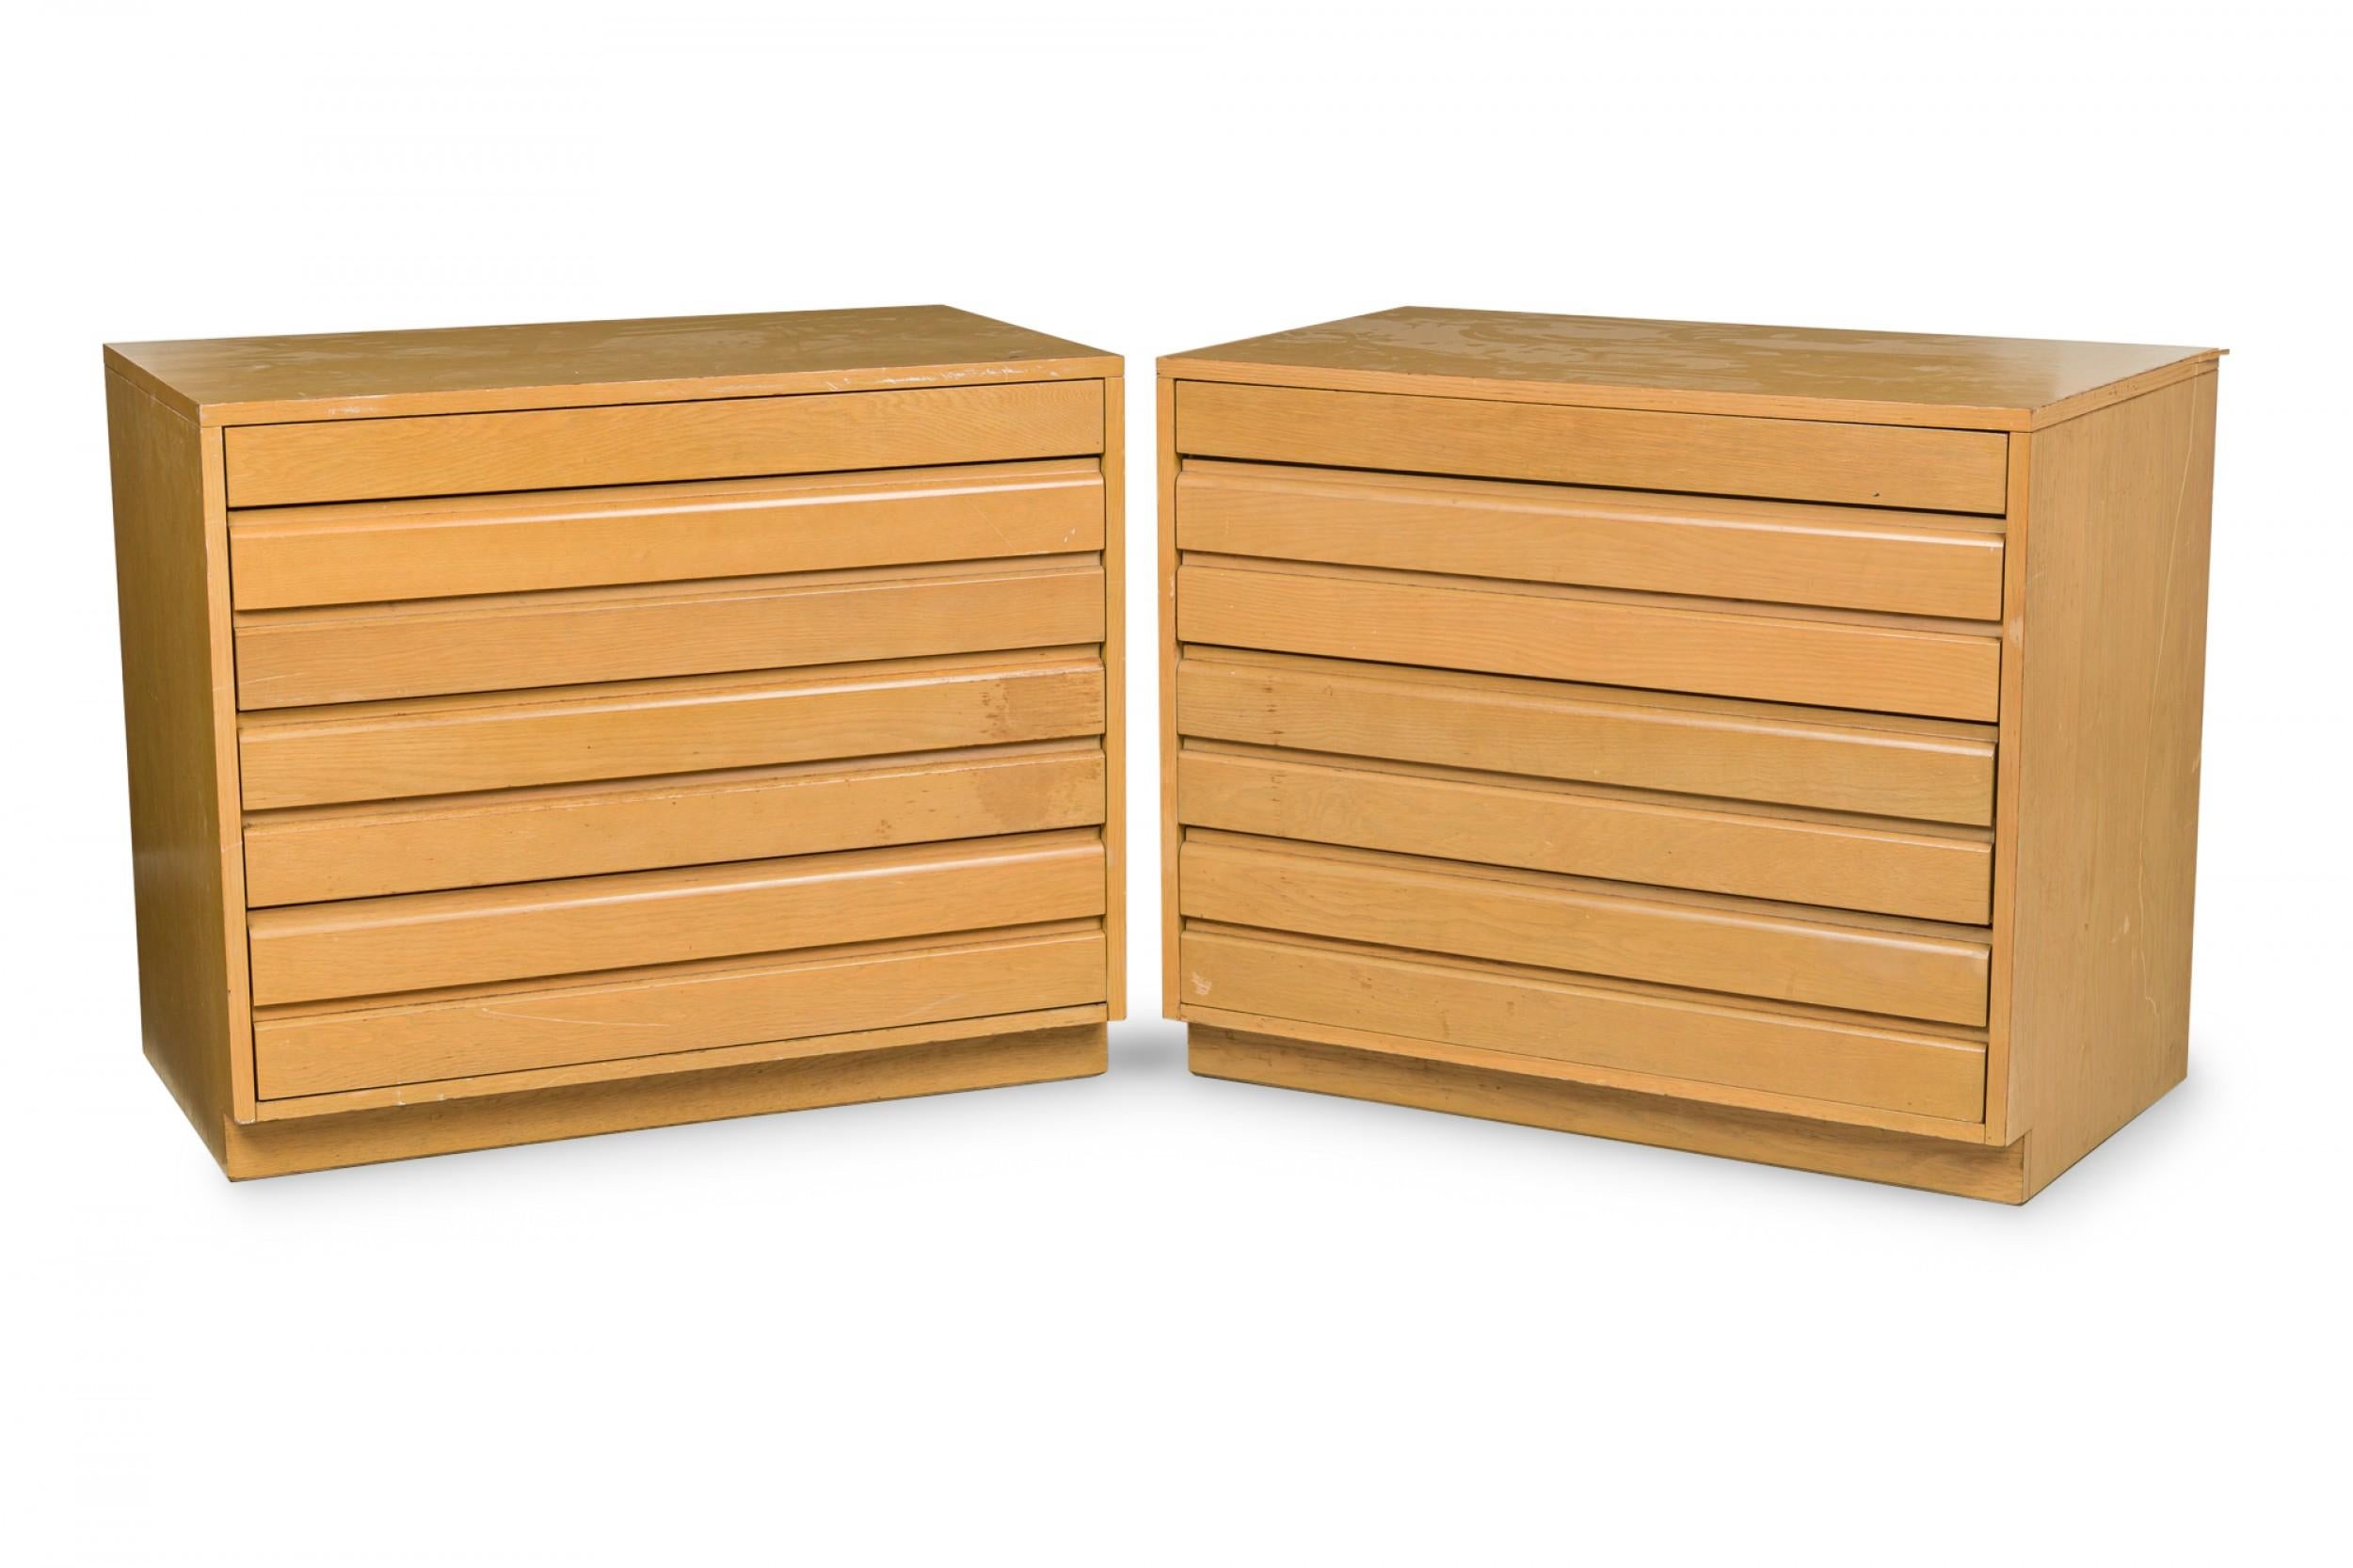 Wood Pair of Sligh Furniture American Modern Chest of Drawers / Nightstands For Sale